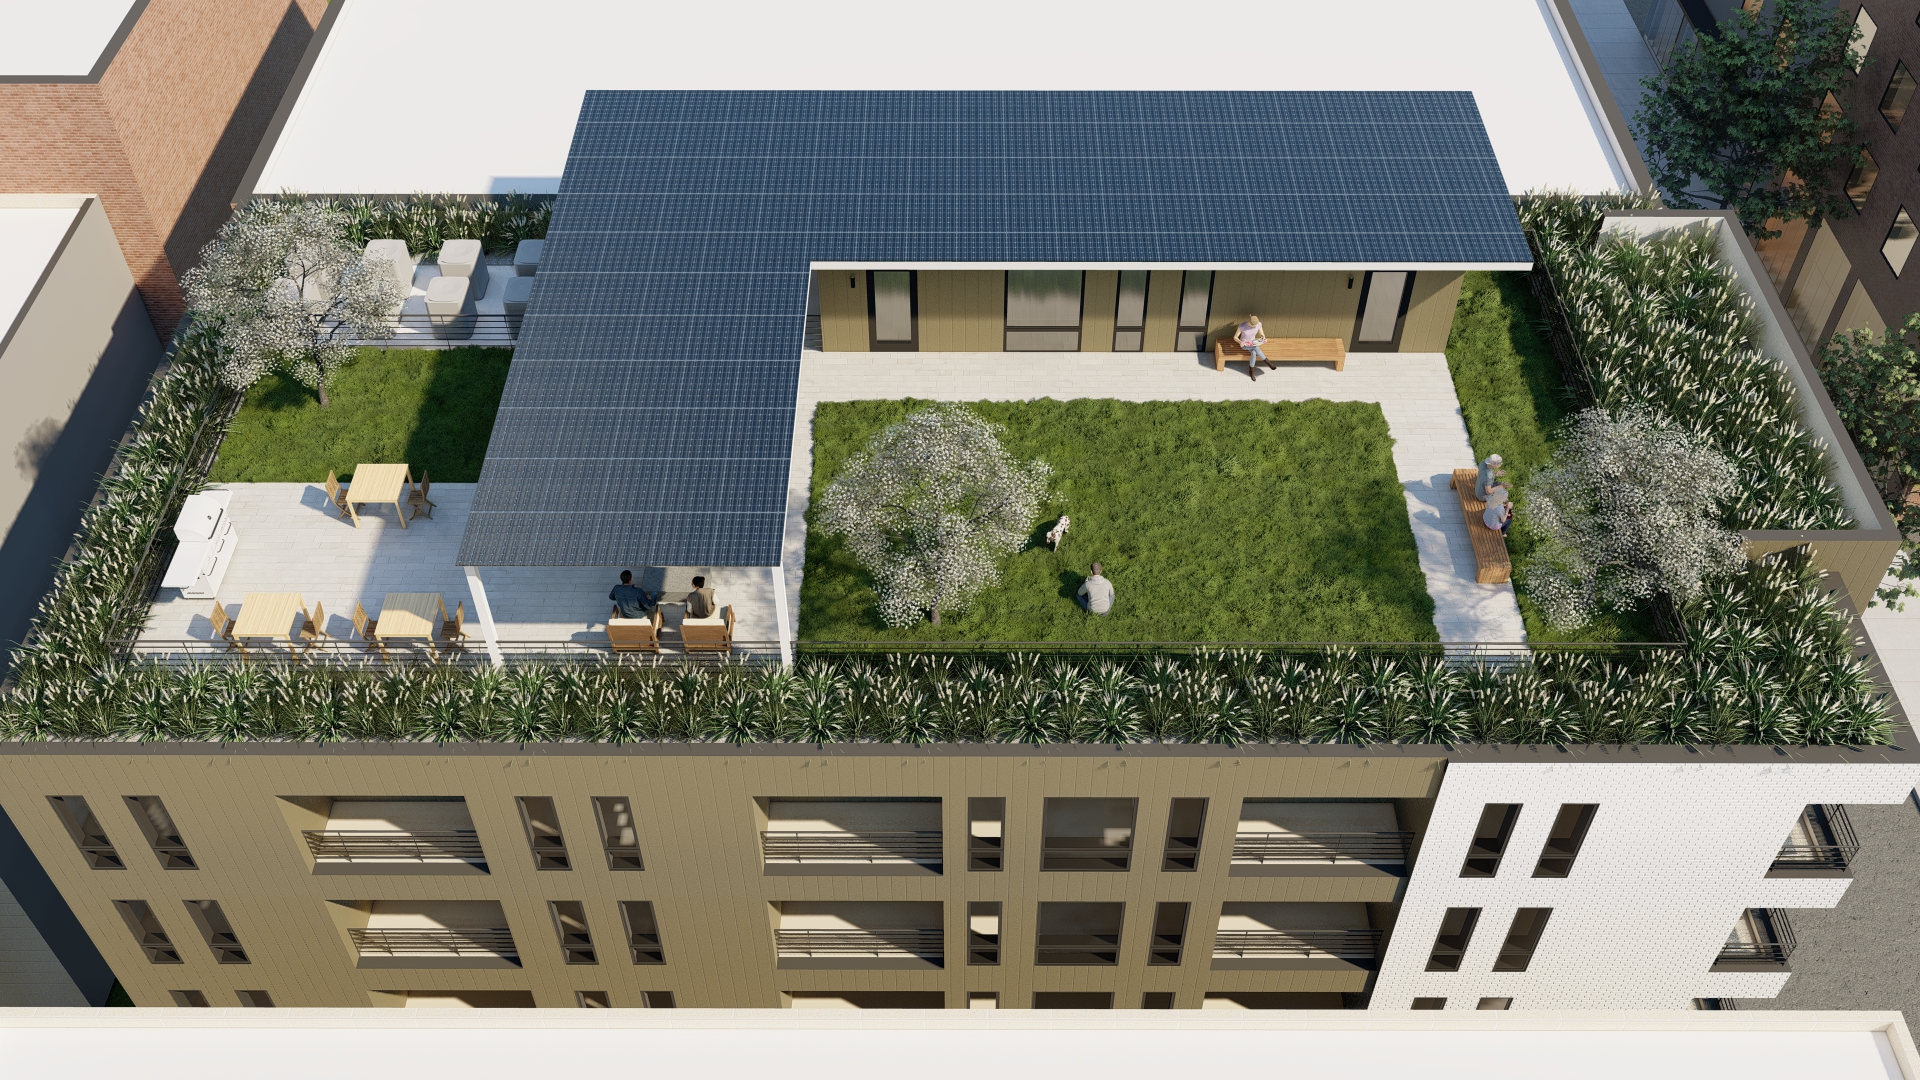 A green roof on the Ivy Commons sustainable architecture development project